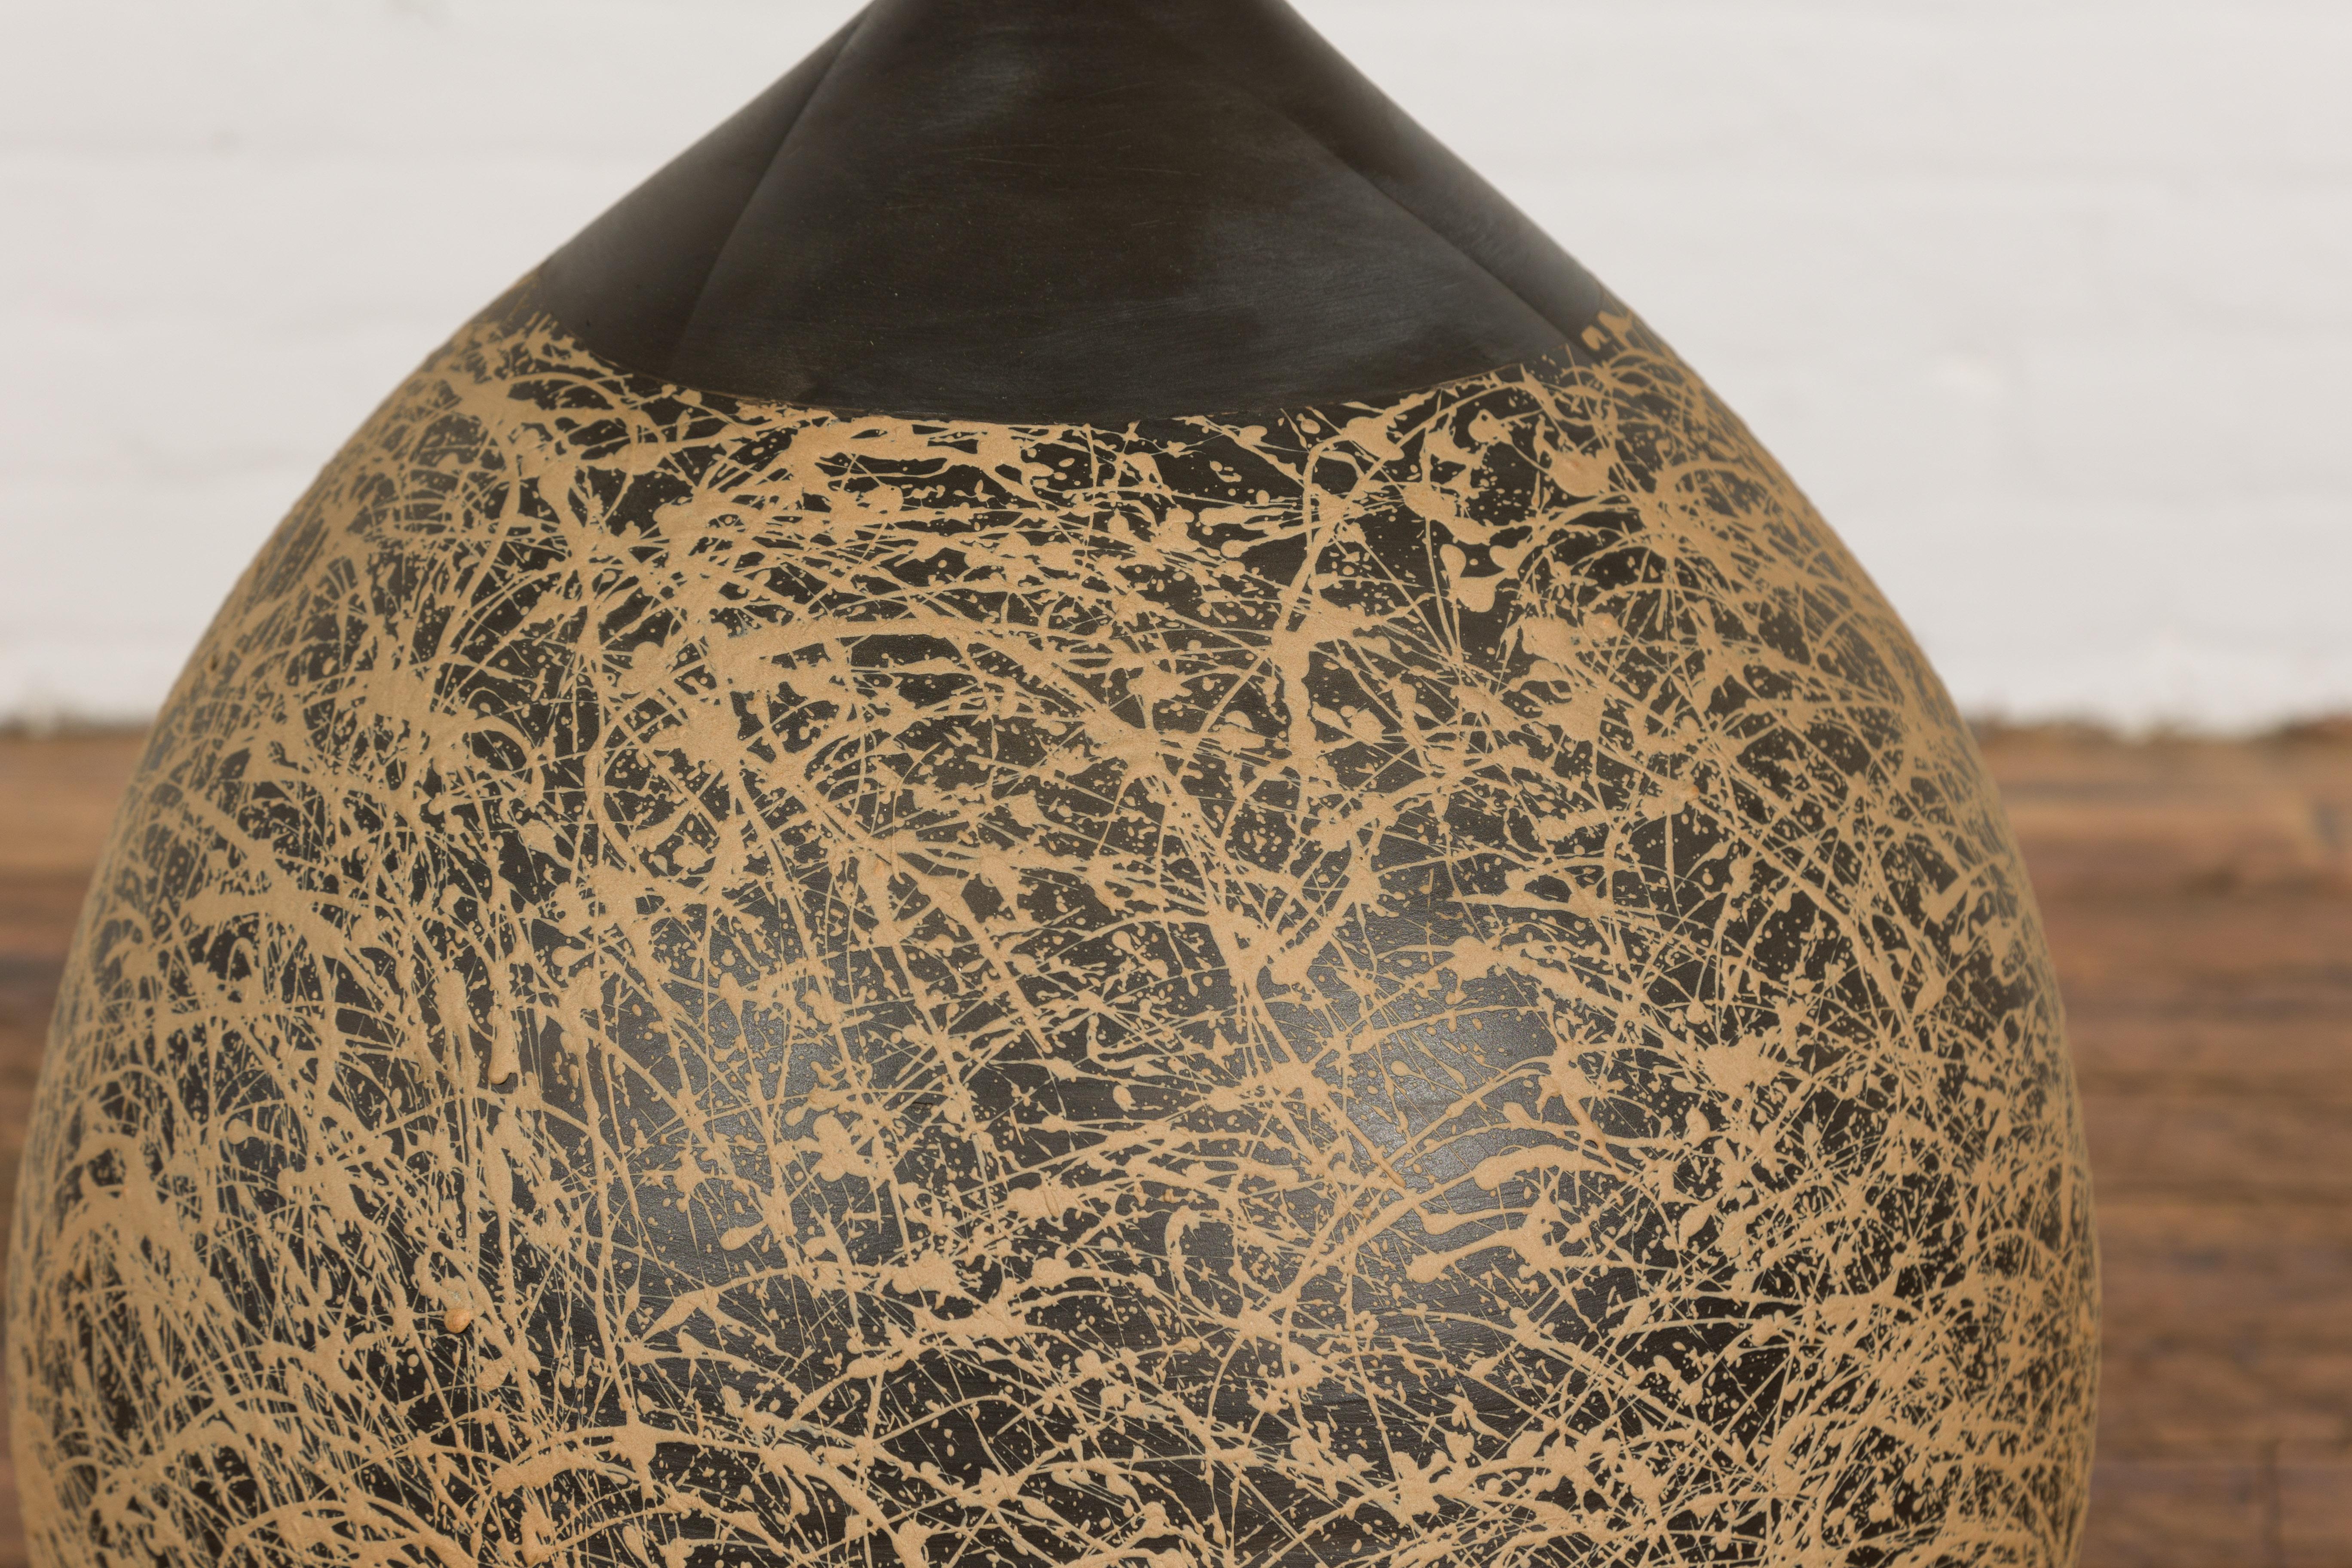 Ceramic Large Prem Collection Hand Crafted Artisan Vase with Black and Brown Décor